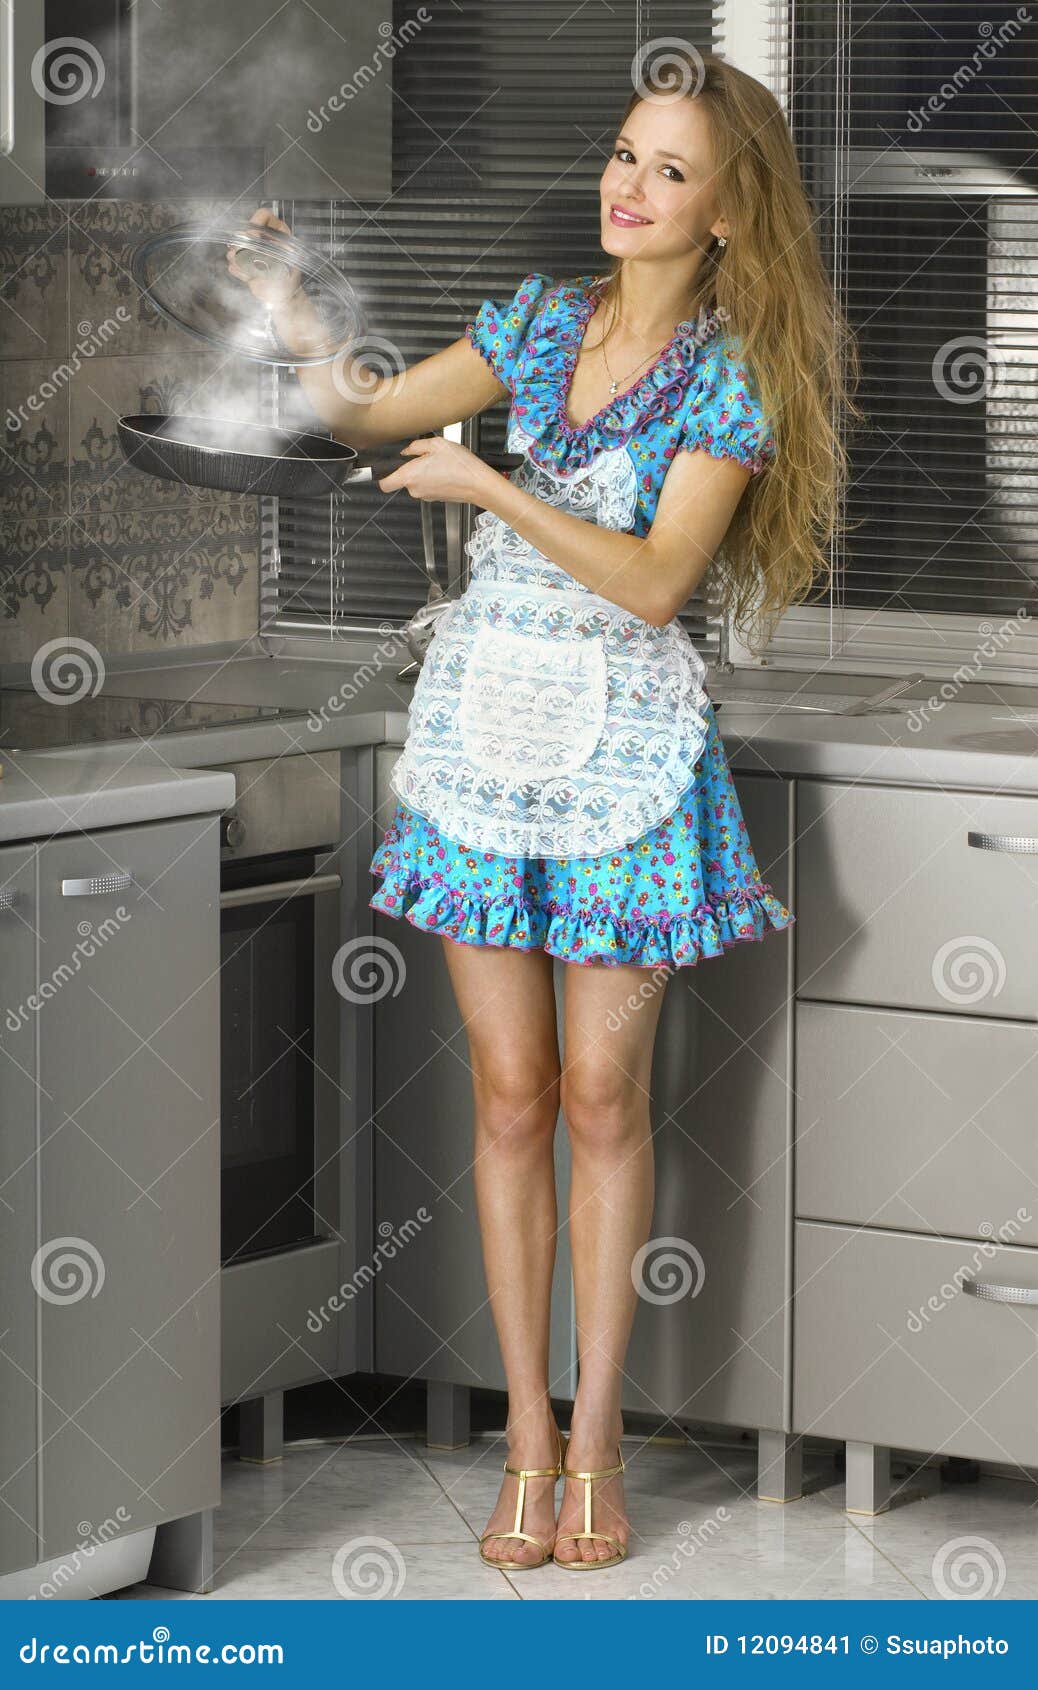 Housewife In The Kitchen Stock Image Image 1209